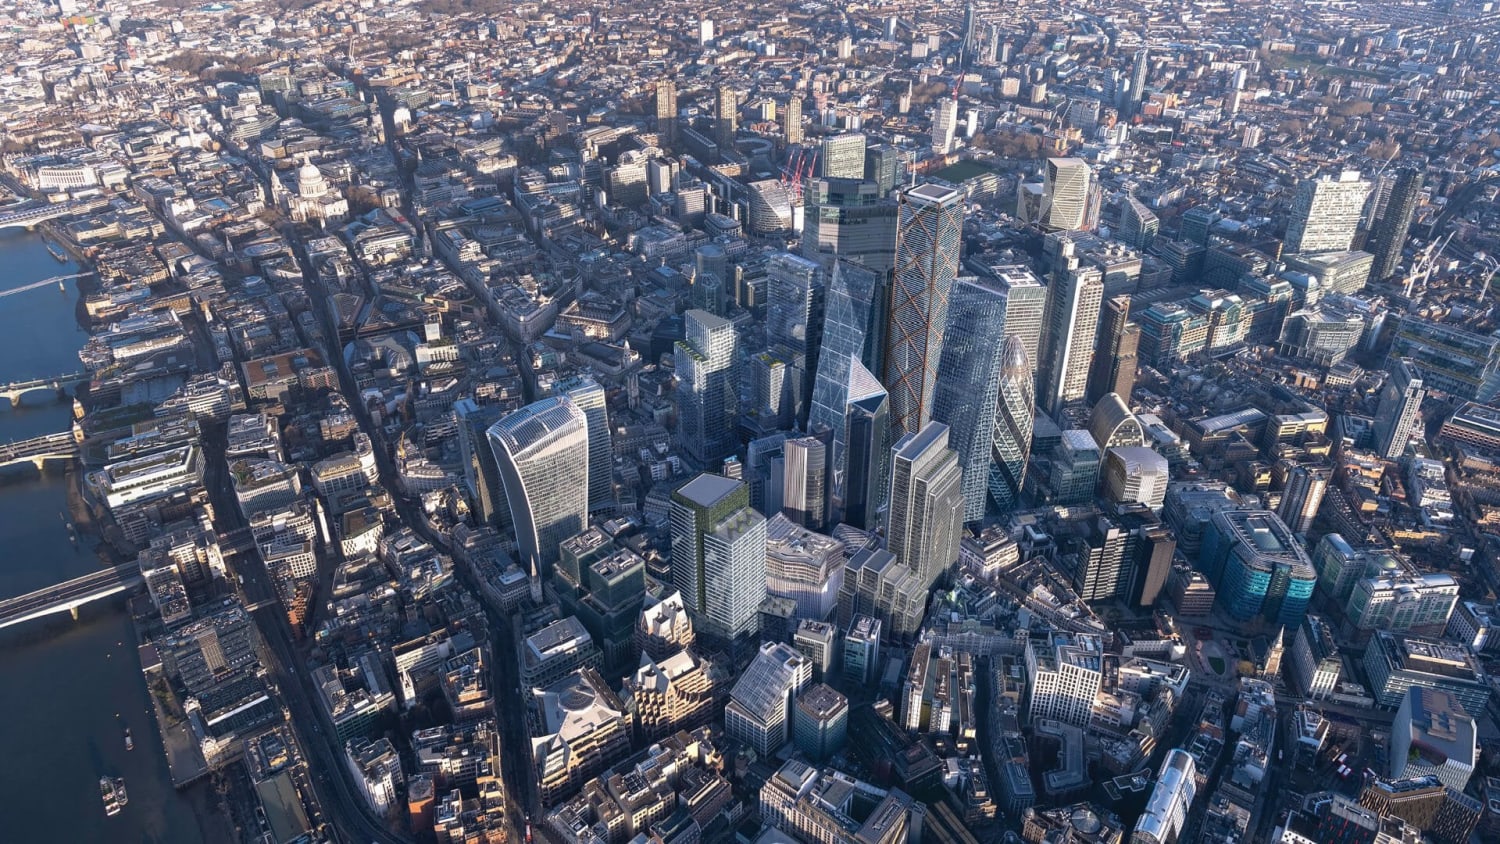 The Square Mile: Future City in London - creating homes for 1,500 residents as part of the post-Covid bounce back